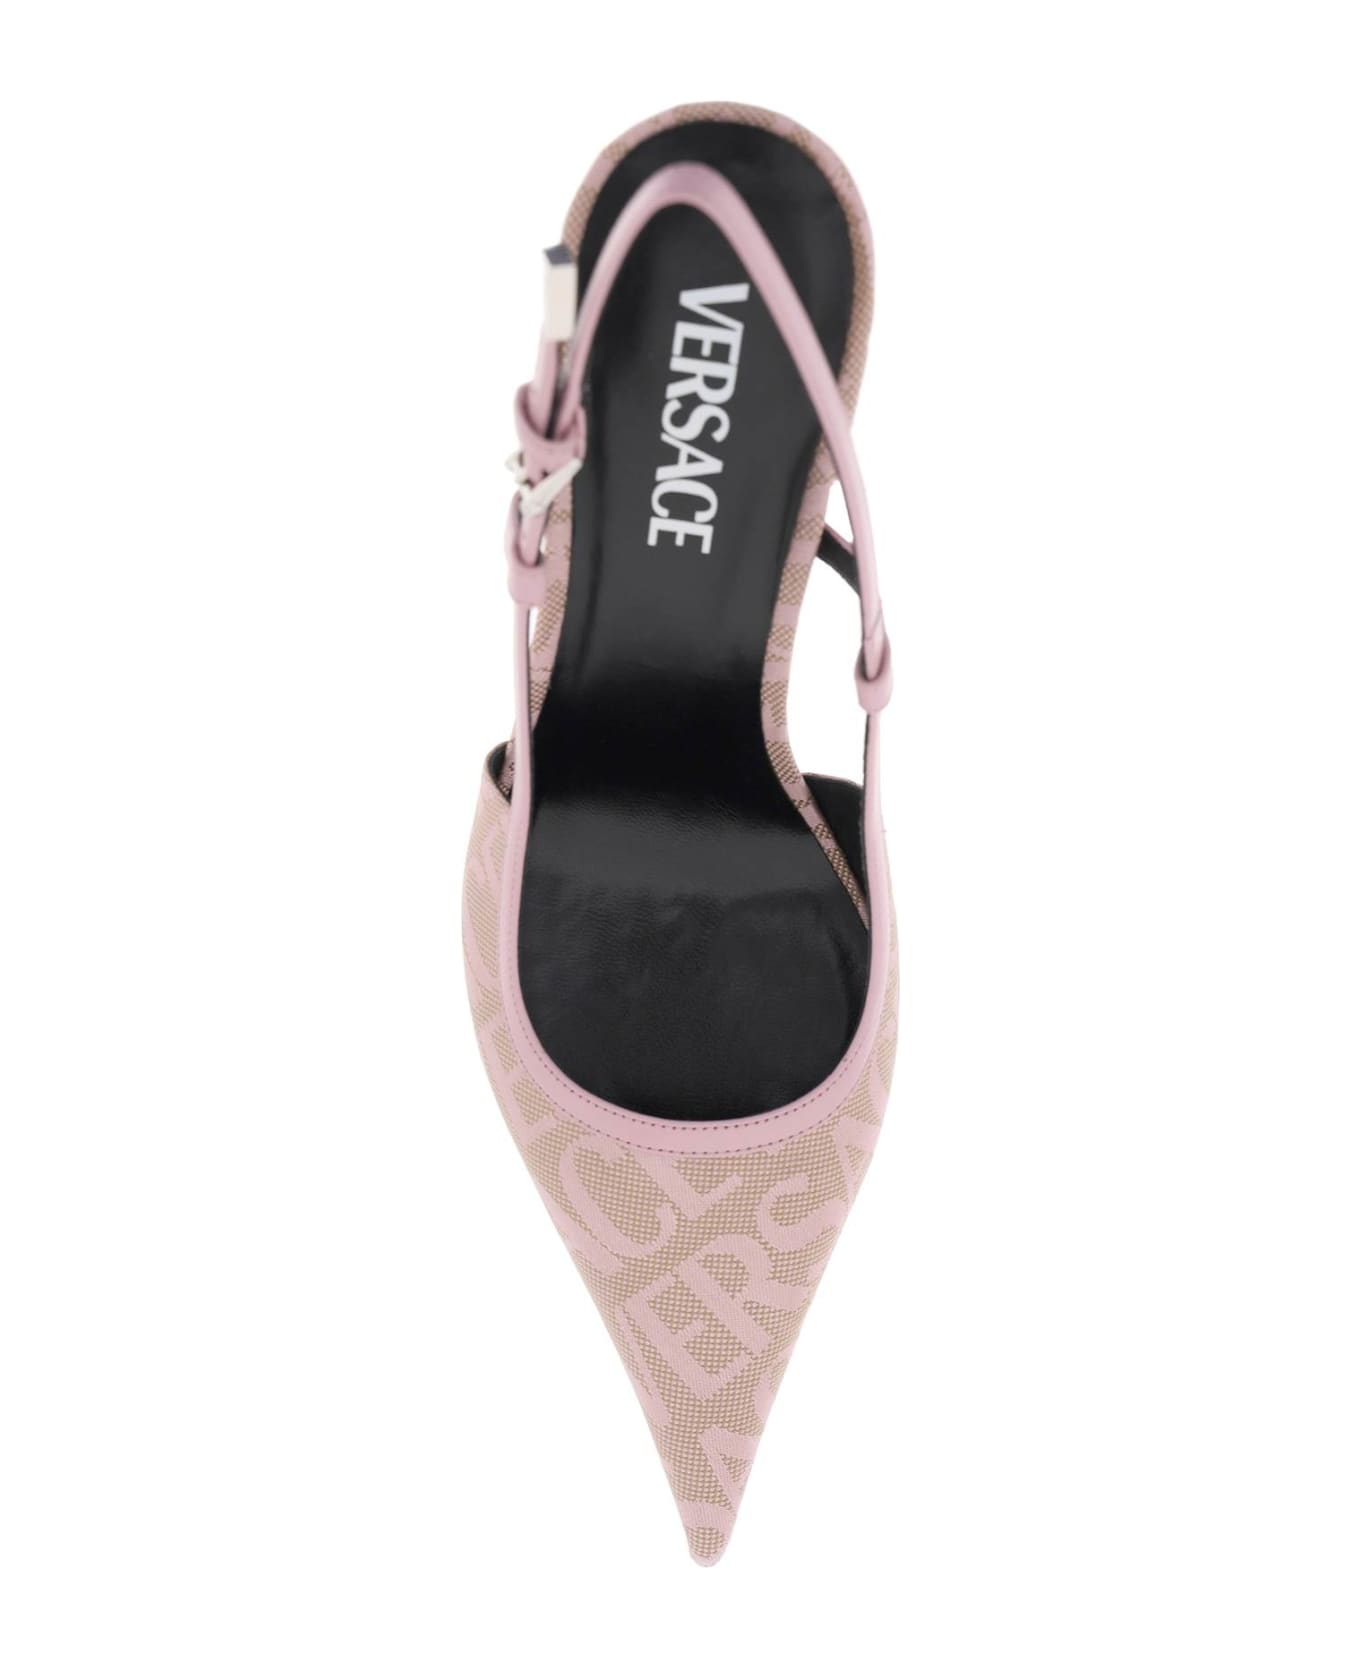 Versace All-over Versace Slingbacks - BEIGE BABY PINK NEW PALLA (Pink) ハイヒール